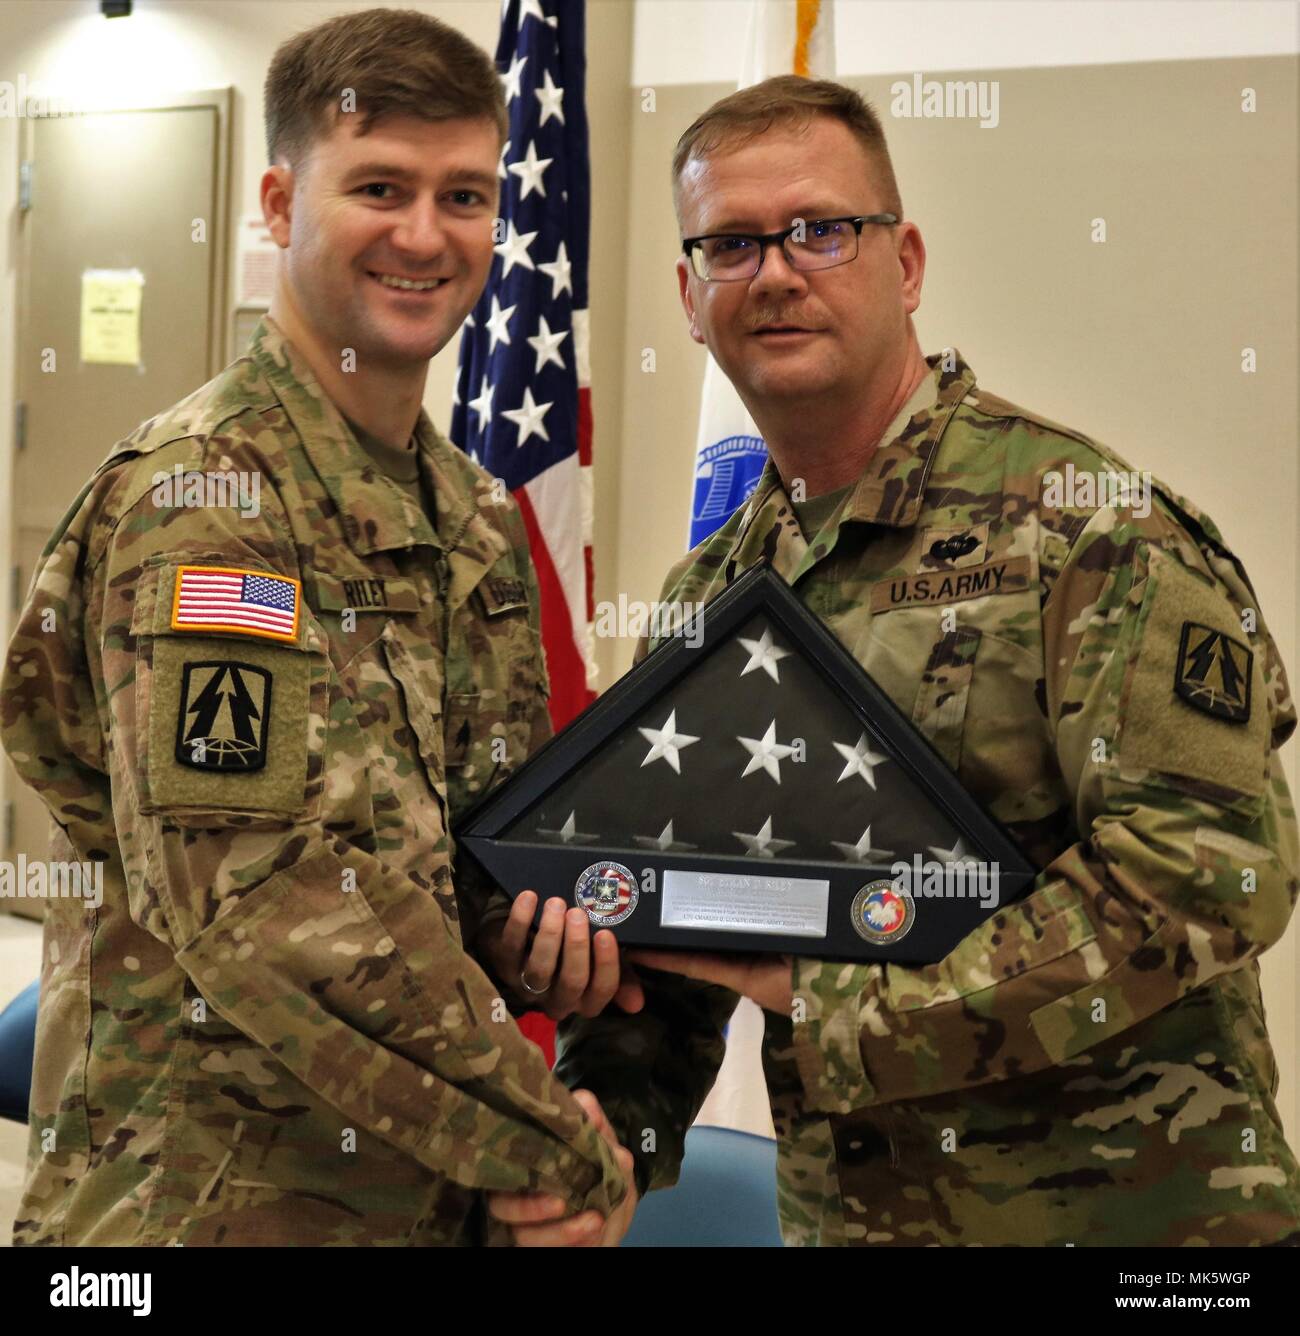 U.S. Army Reserve Sgt. Ethan Riley, a network operations analyst, recently  deployed with Detachment 56, part of the North Central Cyber Protection  Center, Army Reserve Cyber Operations Group (ARCOG), 335th Signal Command (